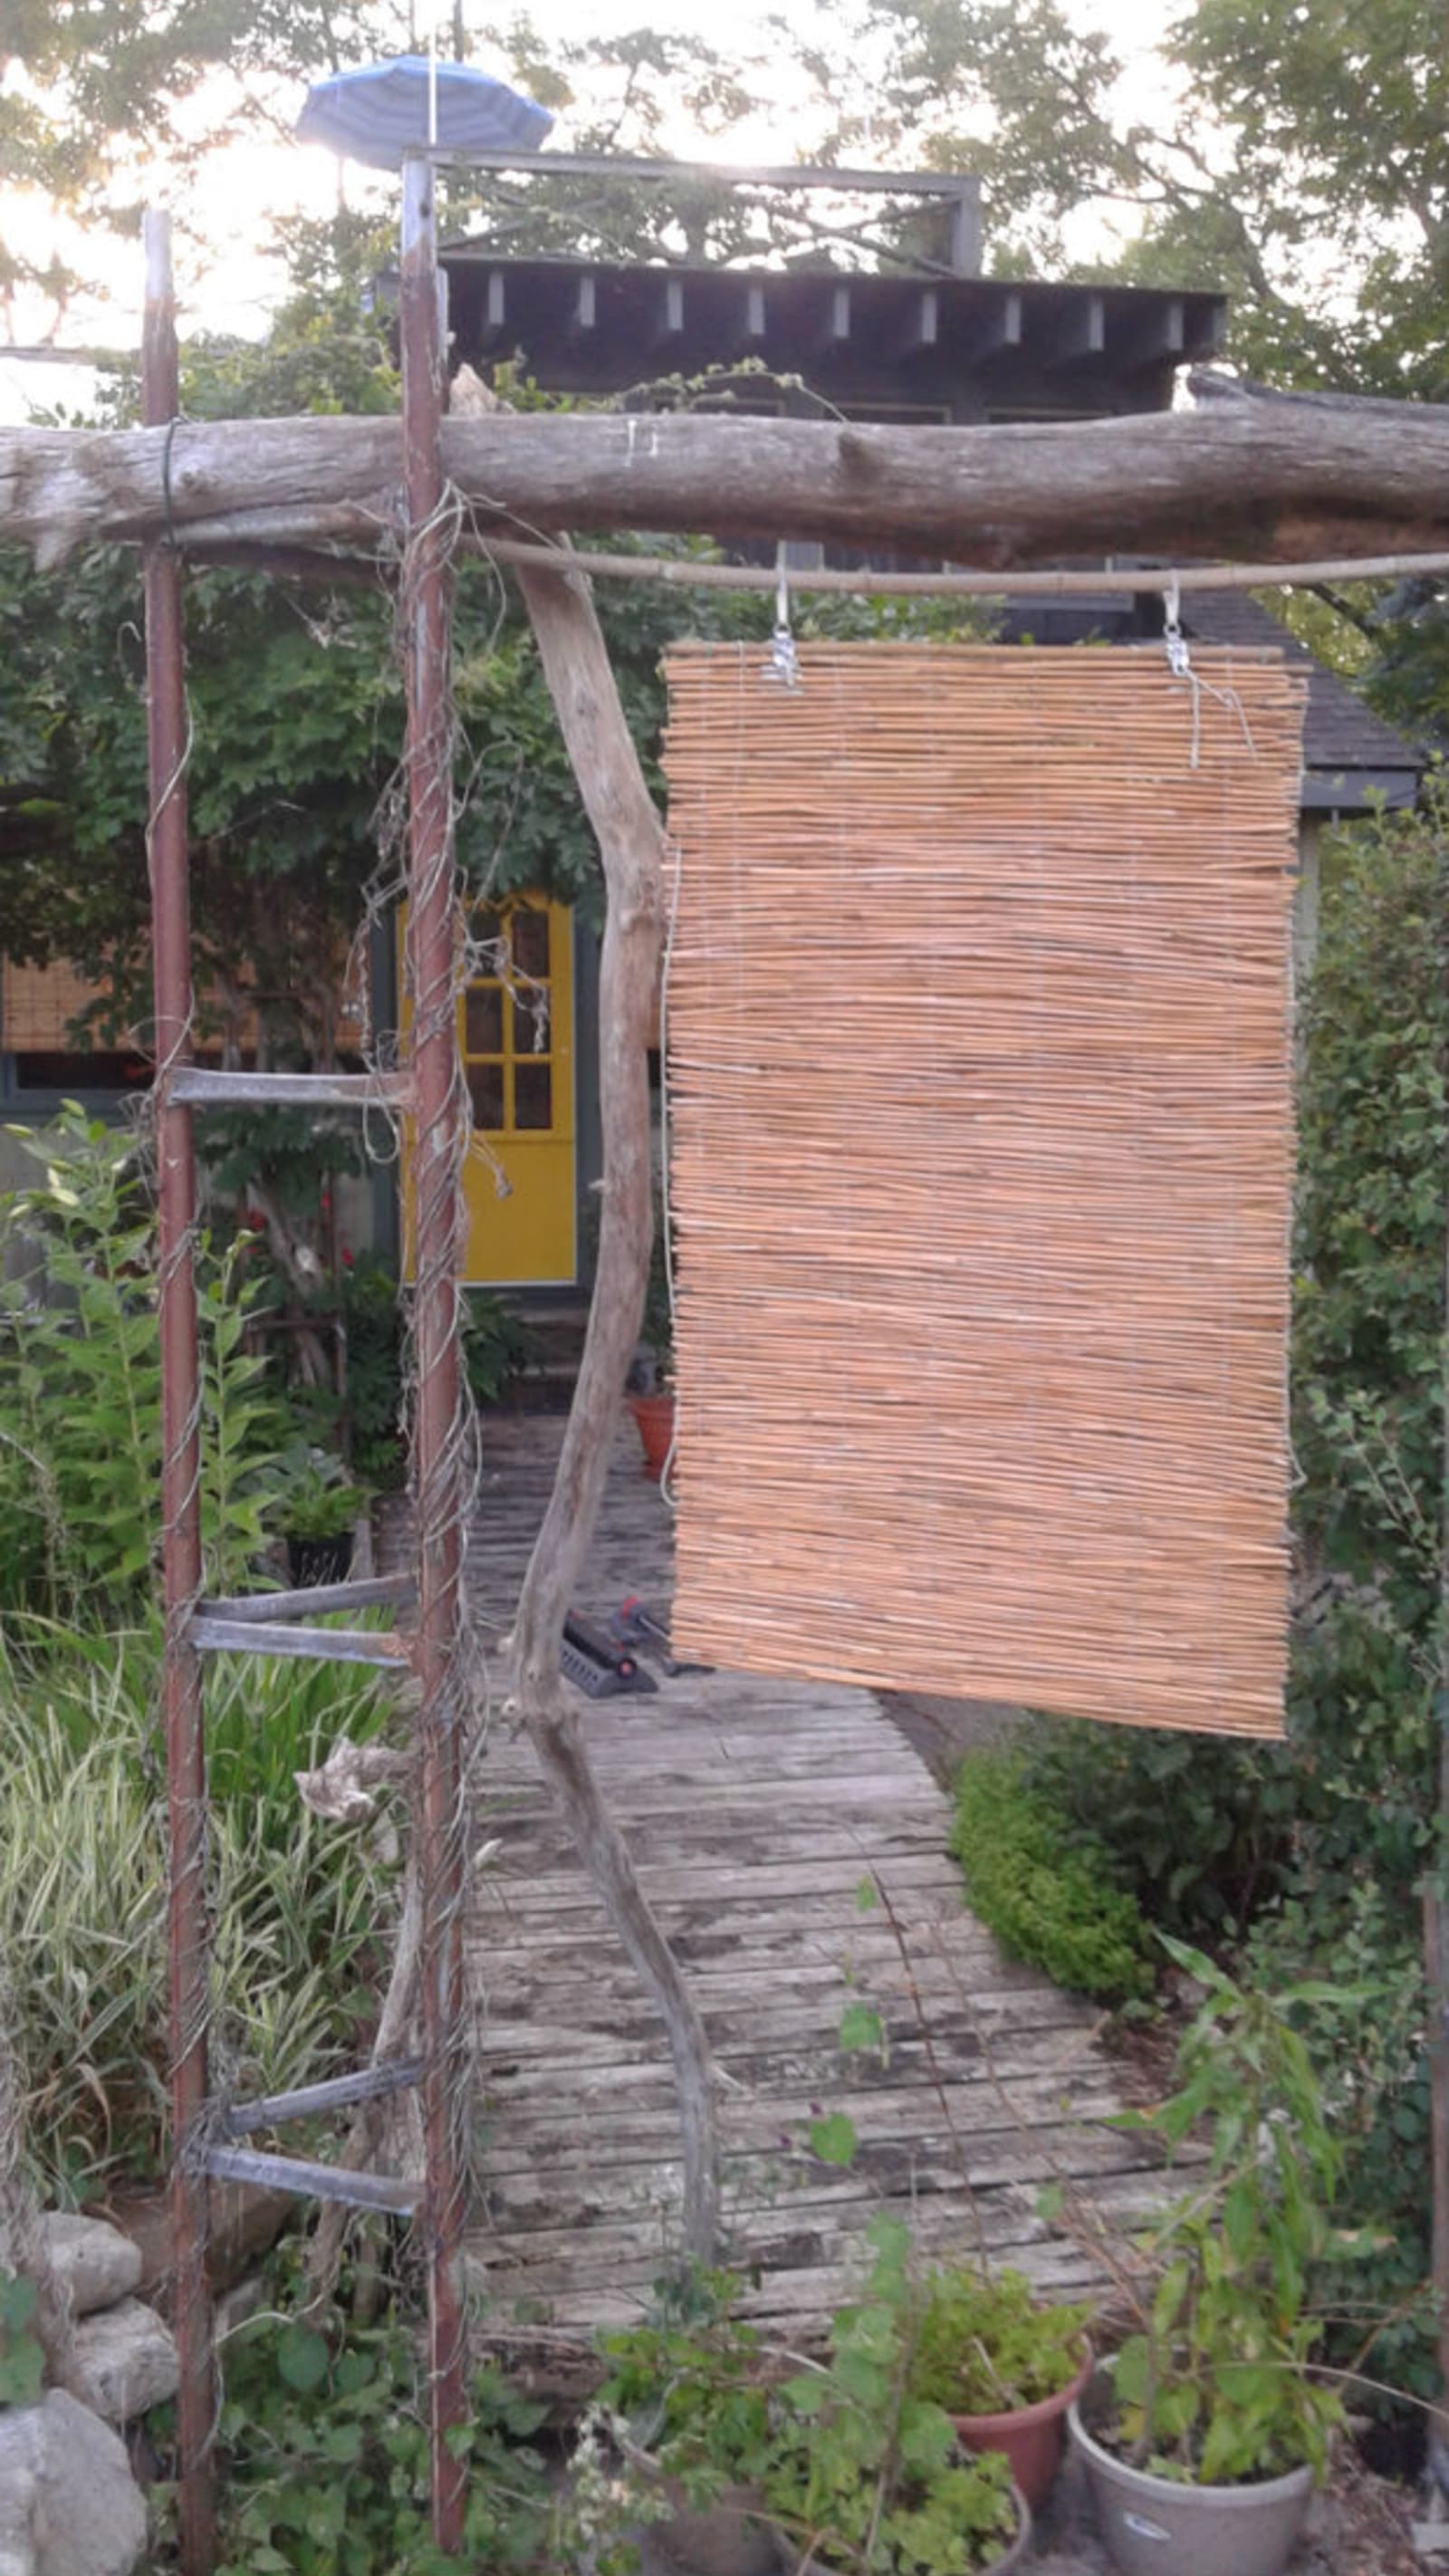 Wards Island House - wooden curtain hanging in the front yard, with a yellow door in the background